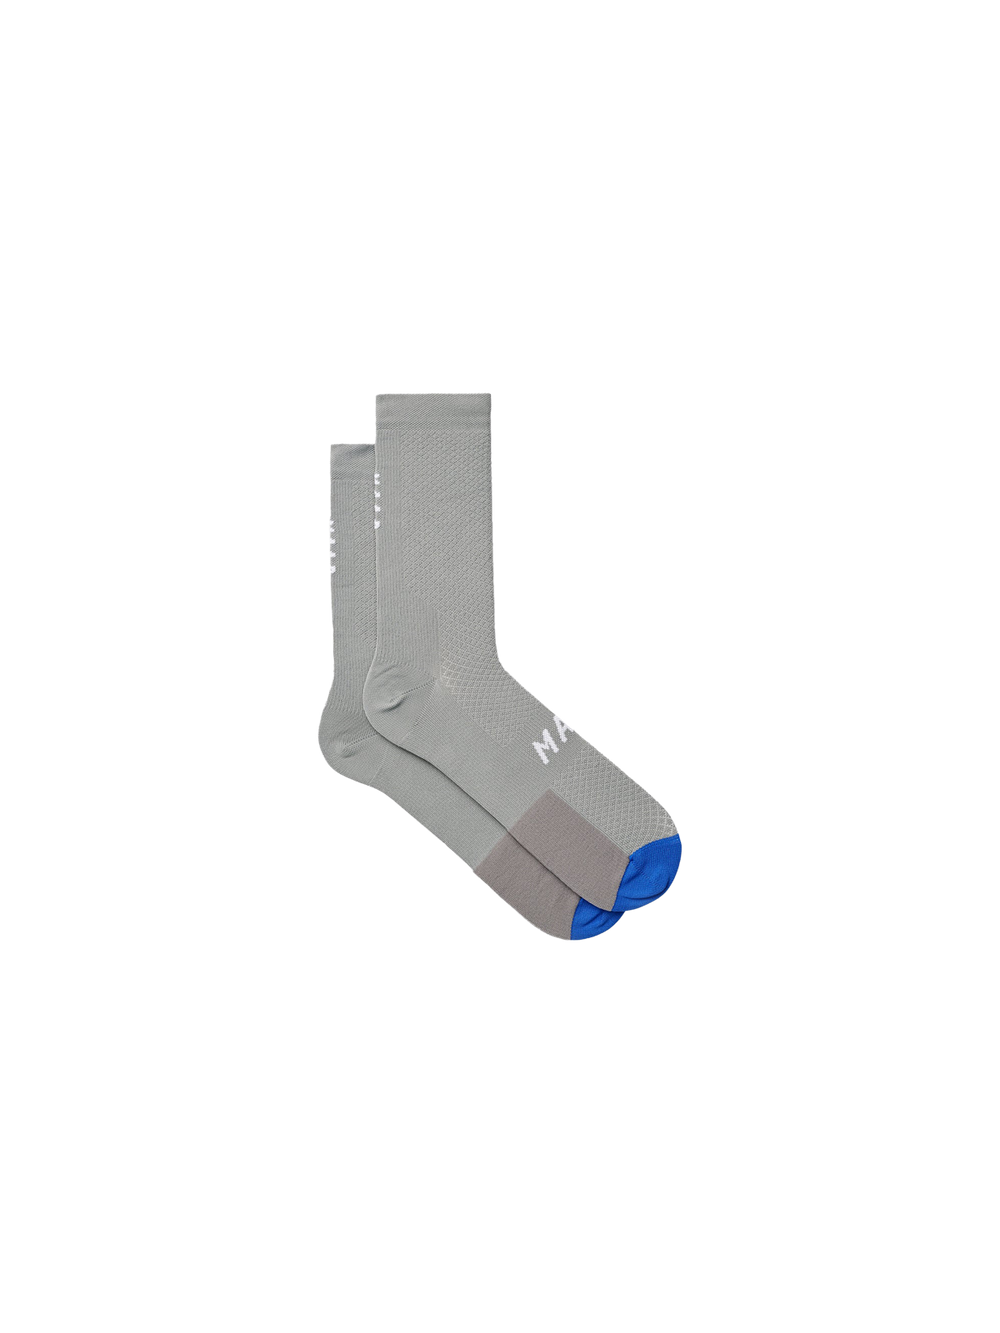 Product Image for Flow Sock